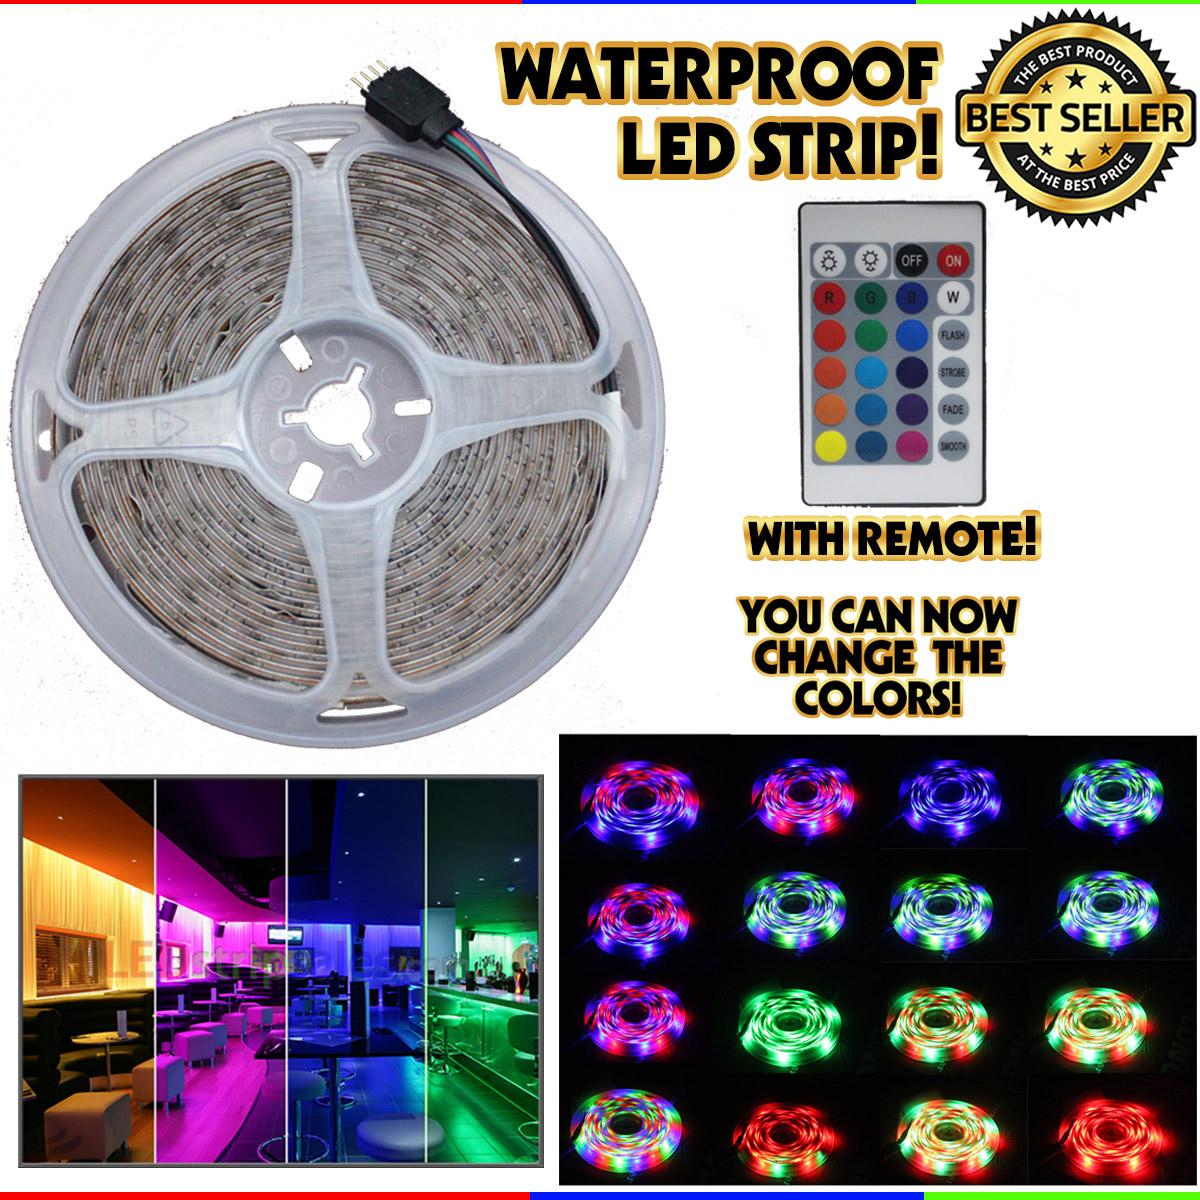 Waterproof Led Strip Lightning 5METERS Decor RGB Color Changing Flexible Led  Strip Light Kit TV Background Lights Party Christmas Fairy Lights Night  Light Cool With Remote | Lazada PH